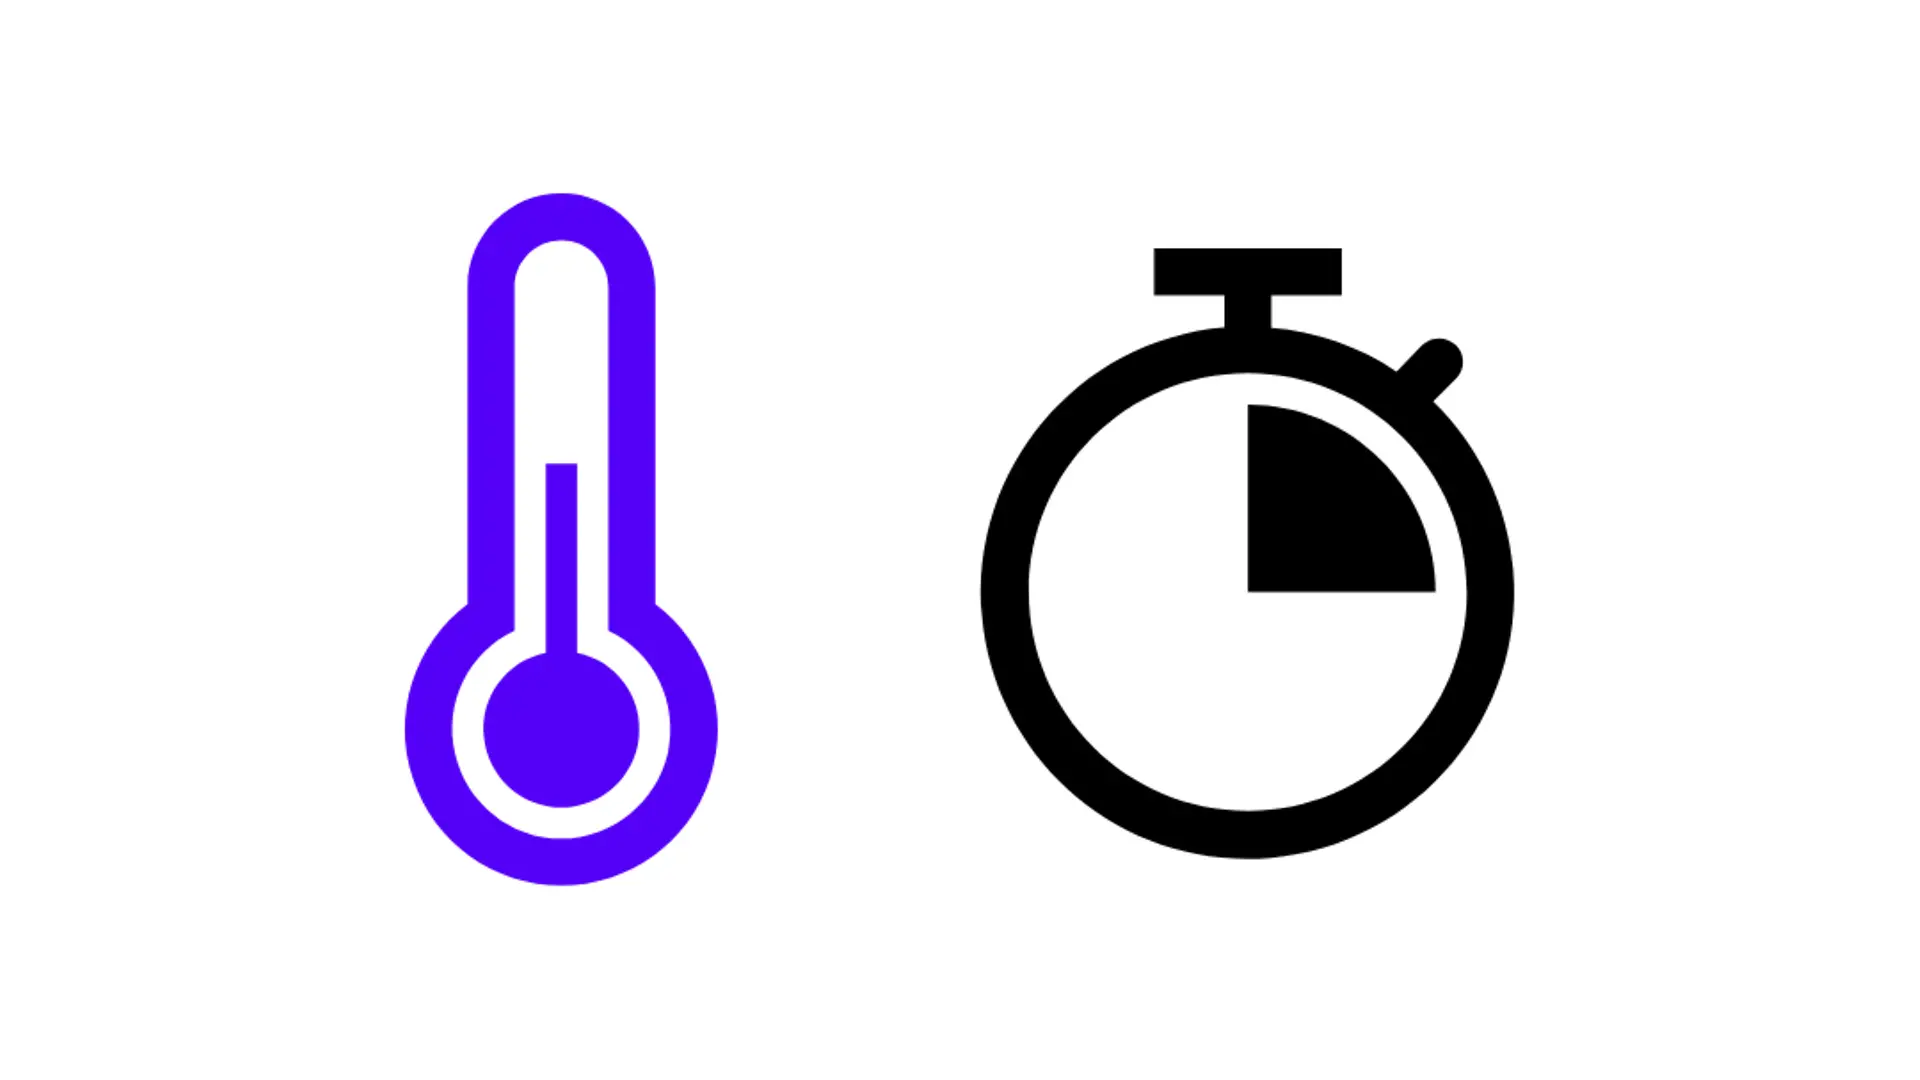 blue symbol for thermometer and clock symbol, quater of an hour